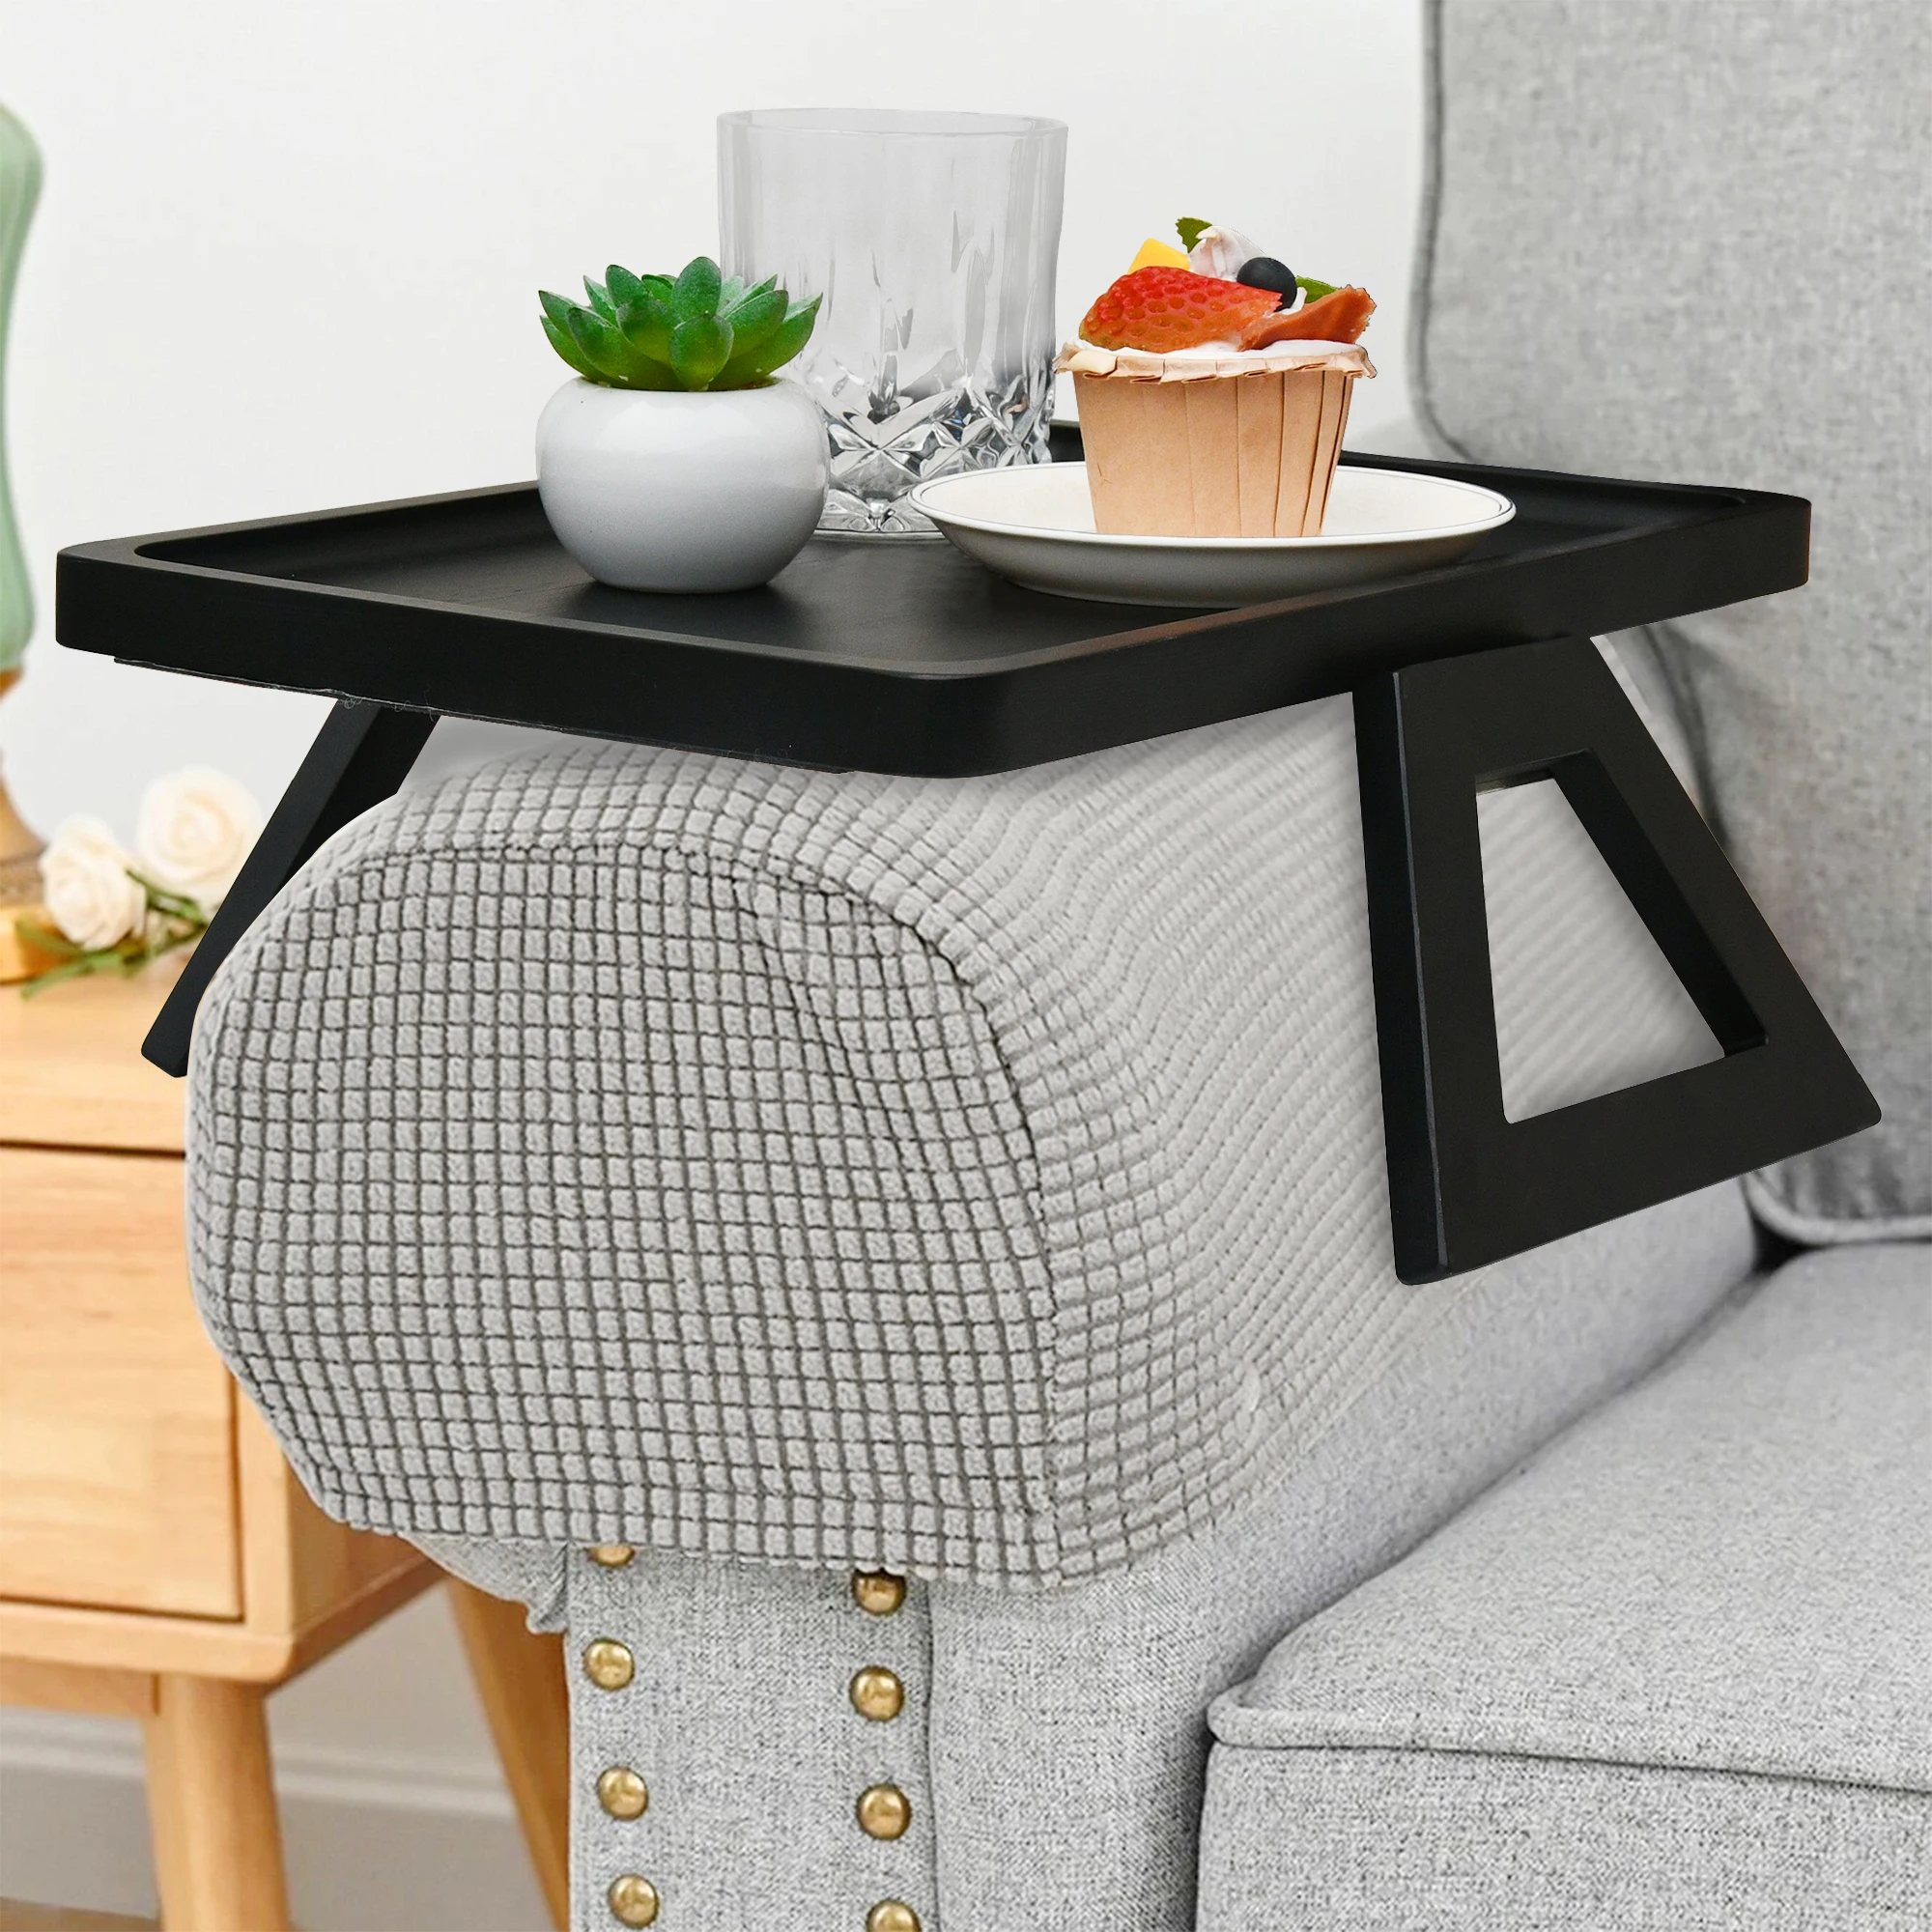 Arm Table Clip On Tray Sofa Table For Wide Couches,Bamboo Sofa Tray Table Clip On Side Table For wide ,Foldable Storage Tray